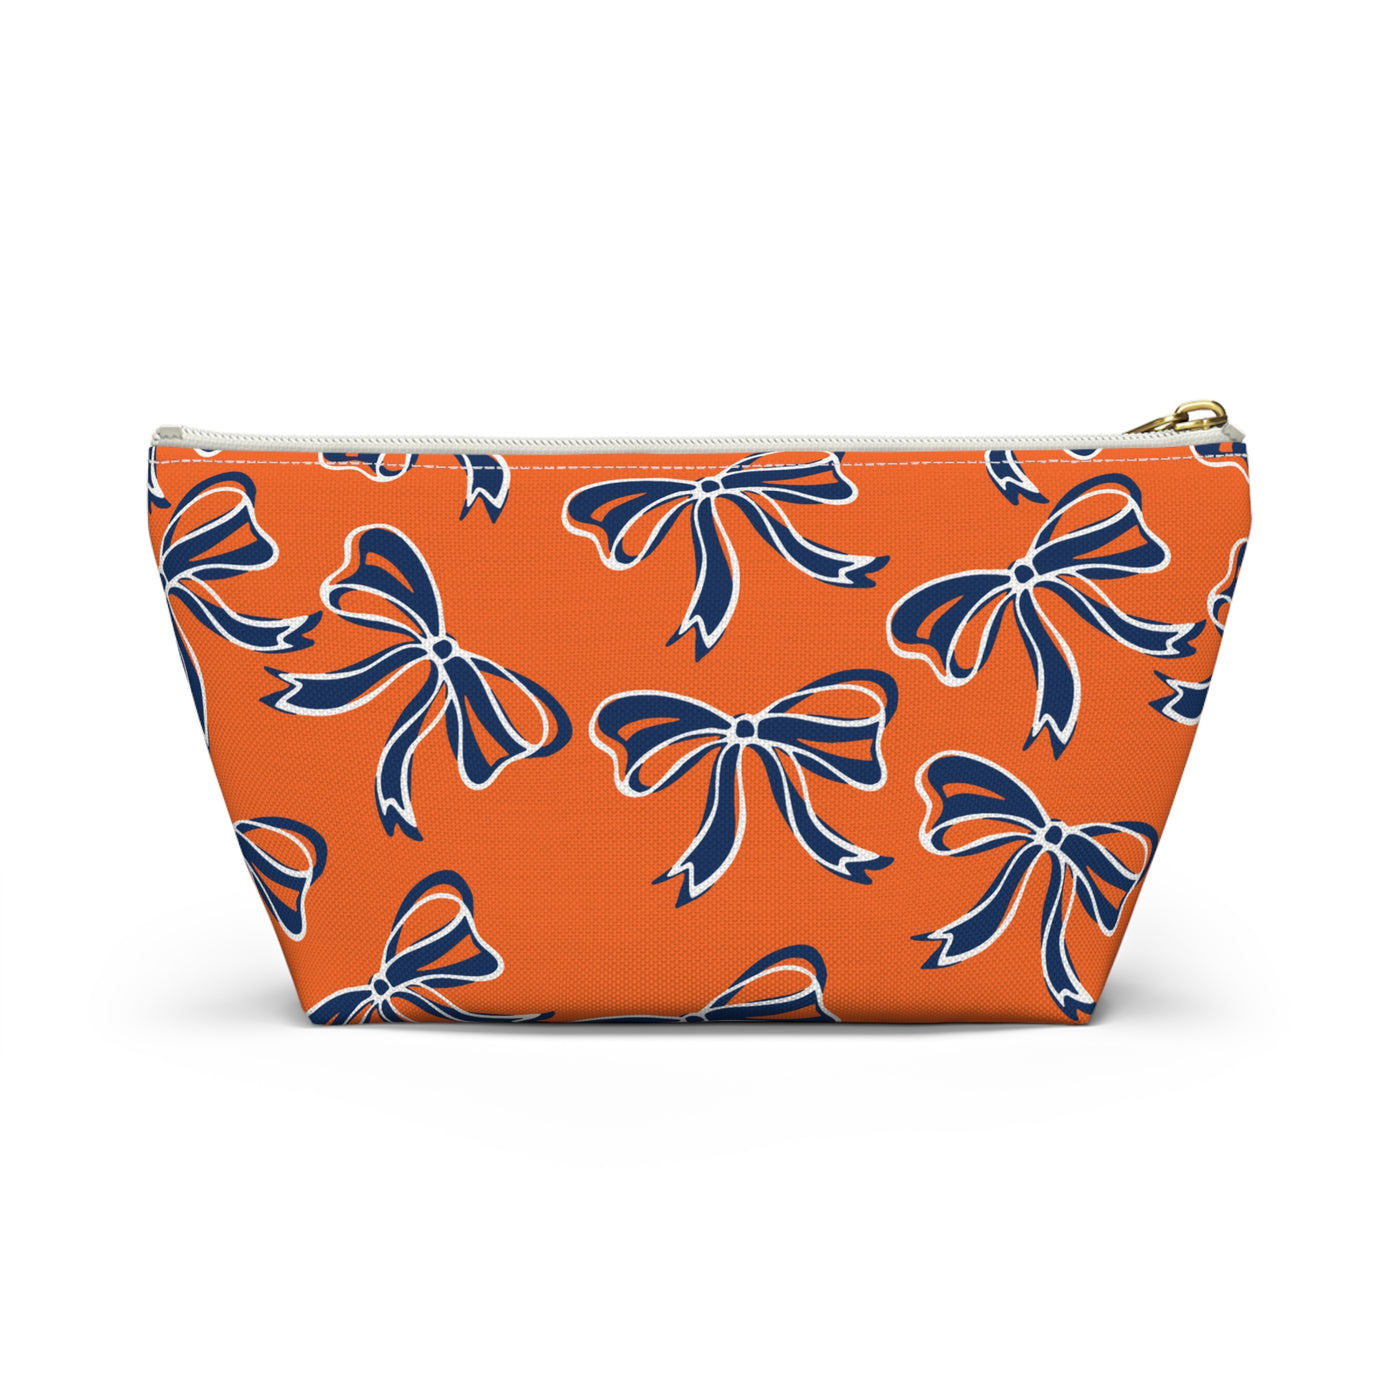 Trendy Bed Party Bow Makeup Bags - Navy & Orange, Bows, Navy Bow, Orange Bow, Bow Gift, Bows - Syracuse, UVA, Bucknell, Auburn, Bow gifts